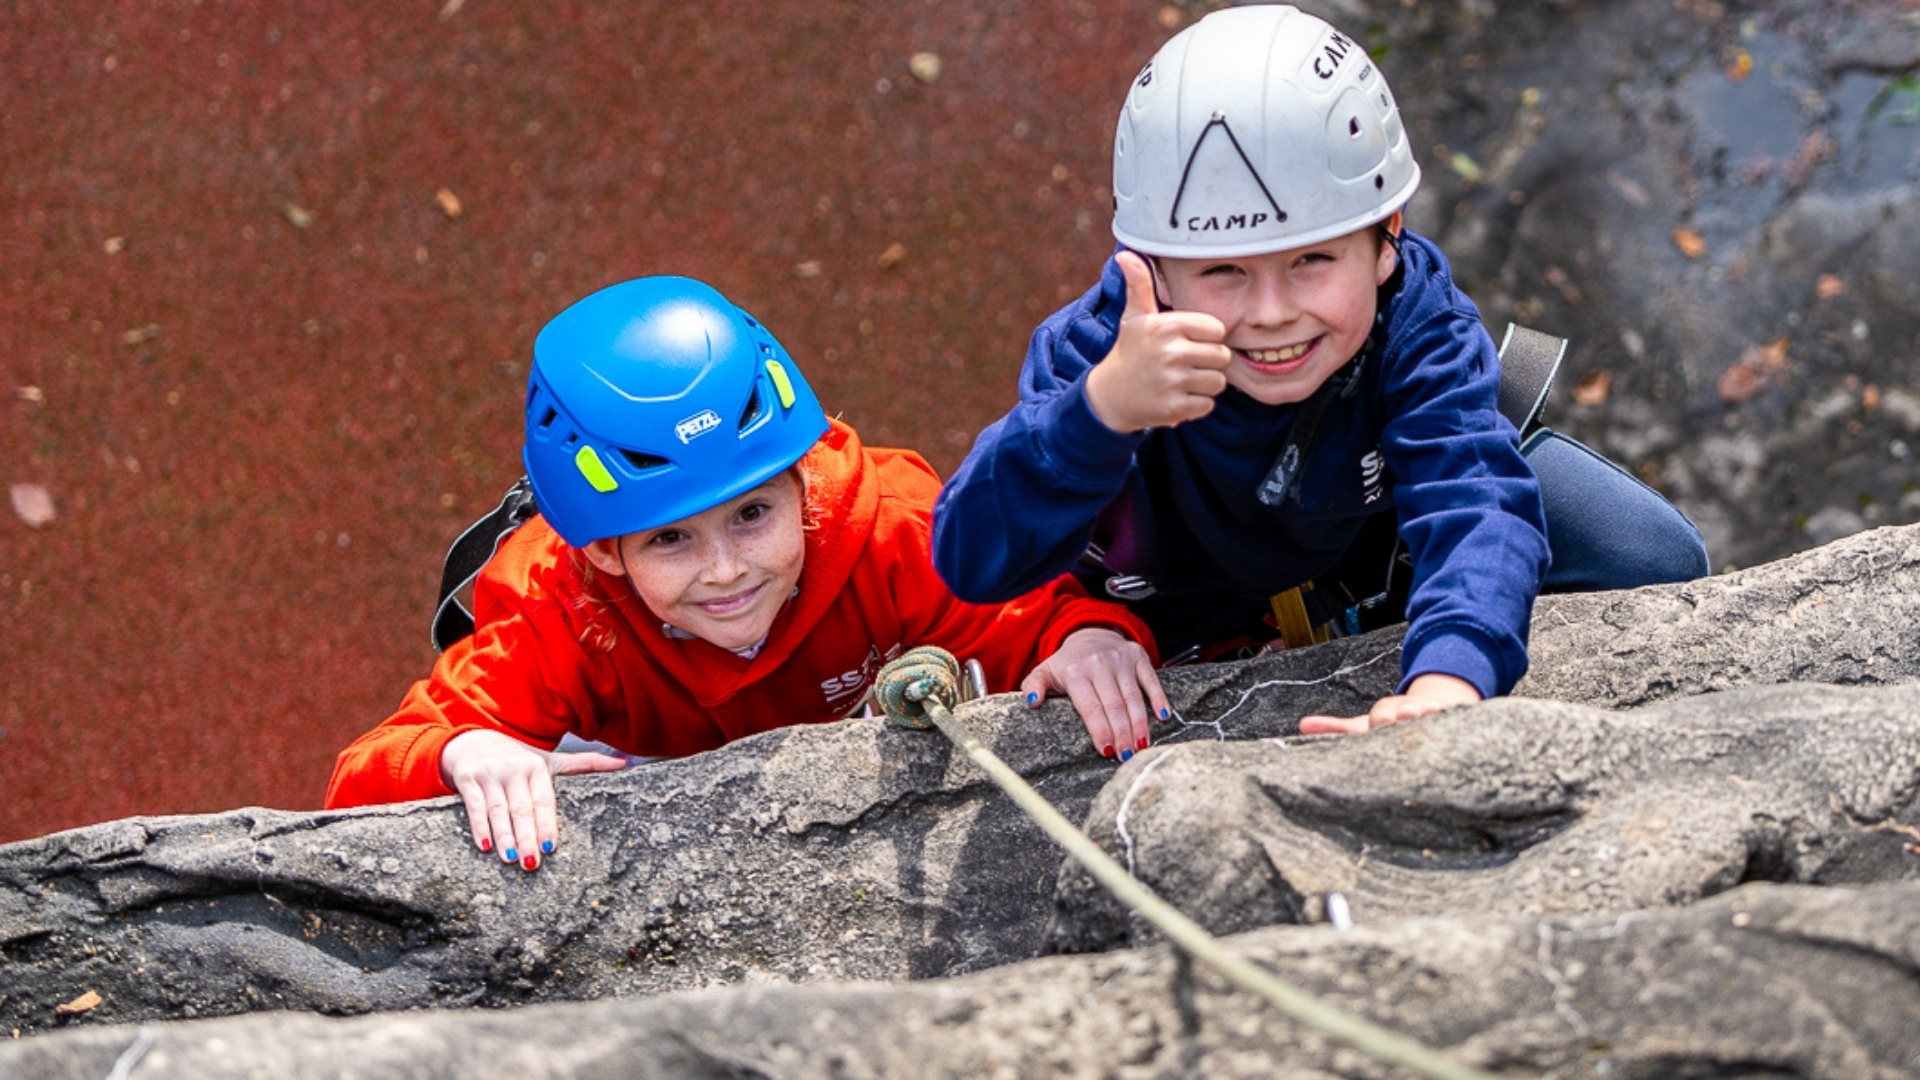 Two children climbing a rock wall with safety rope, one is giving a thumbs up to the camera